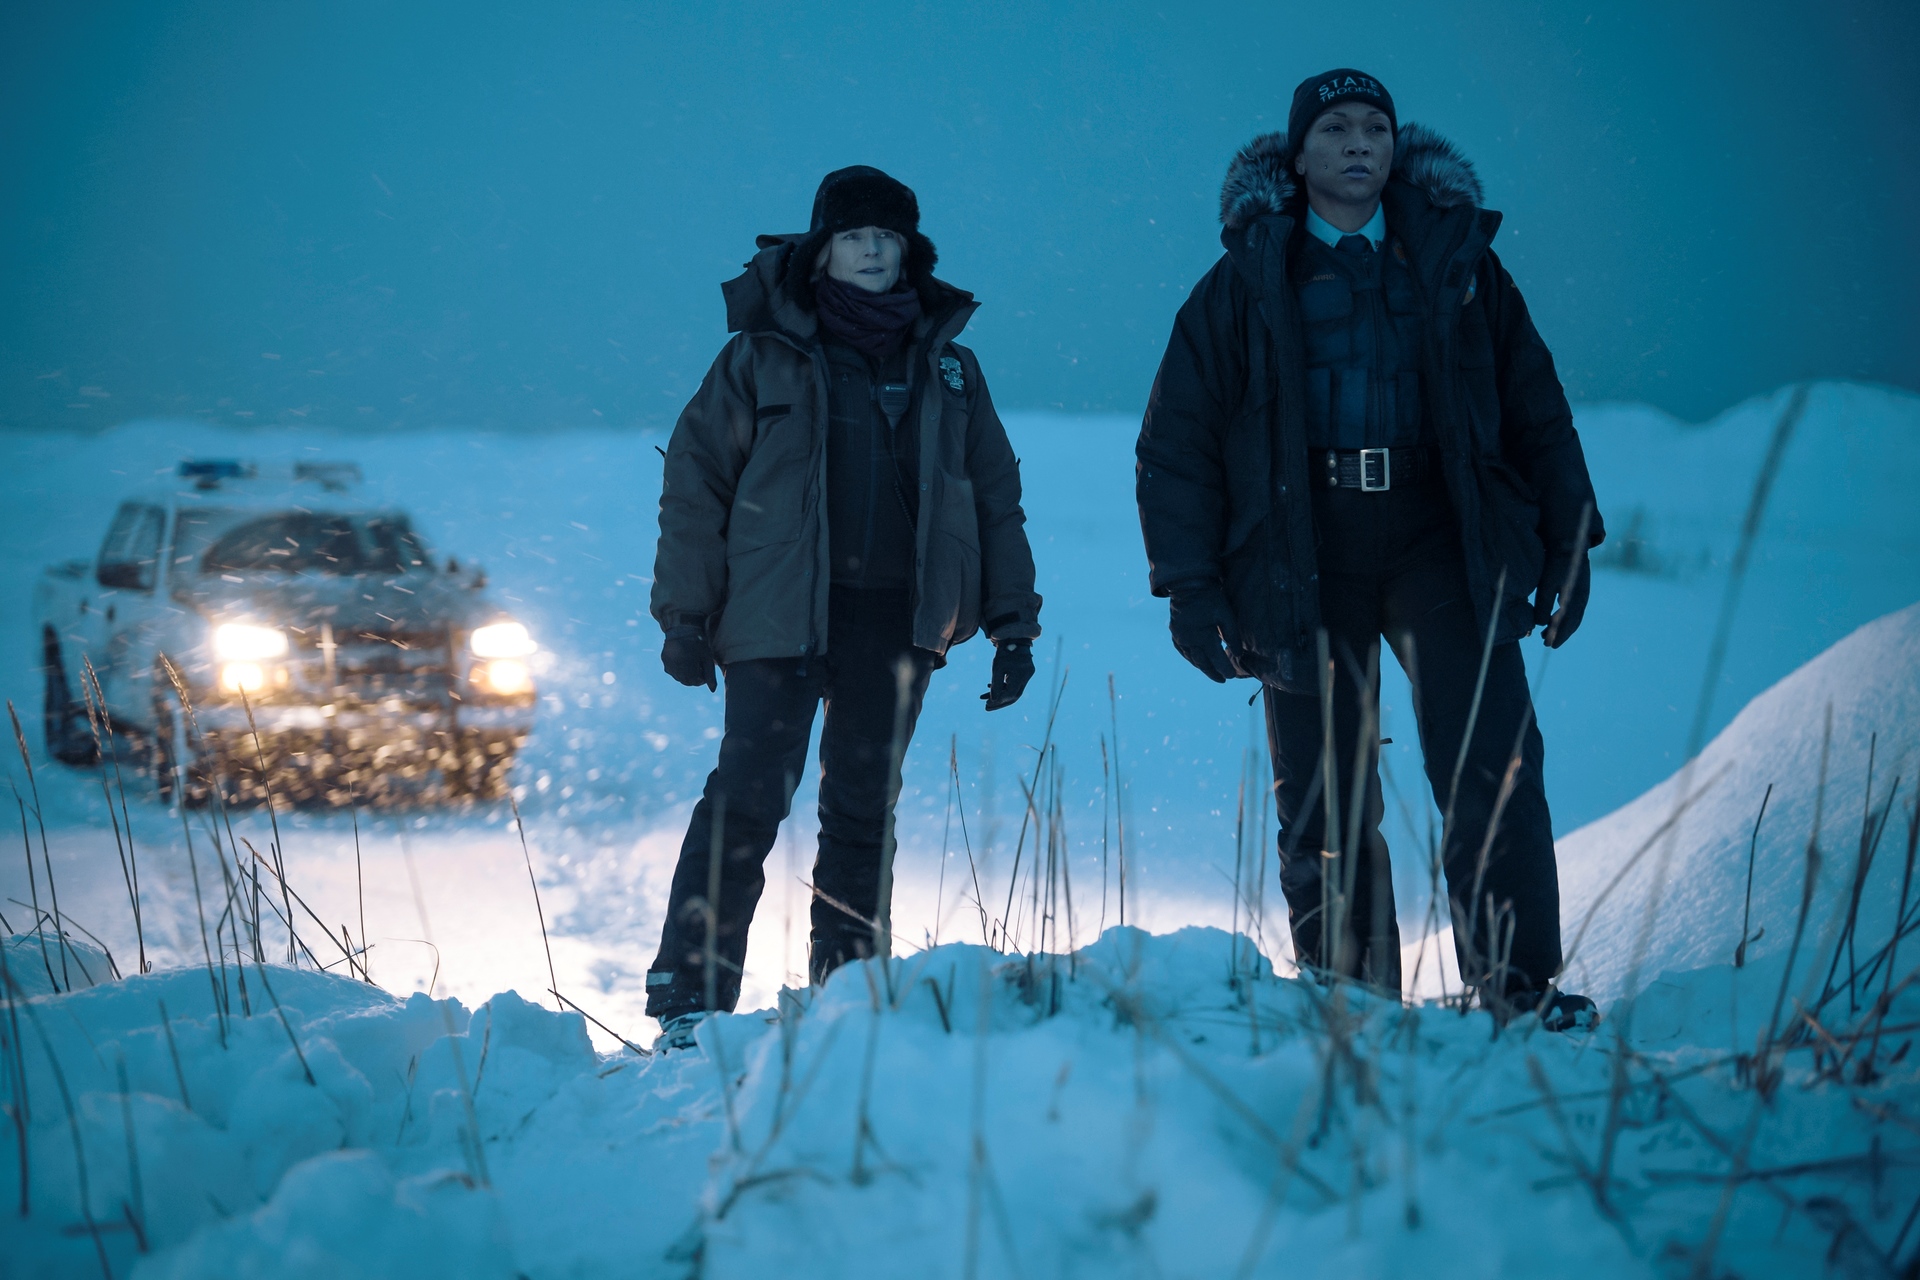 Image from the set of True Detective: Night Country: actors Jodie Foster and Kali Reis pictured in police uniform in snowy landscape